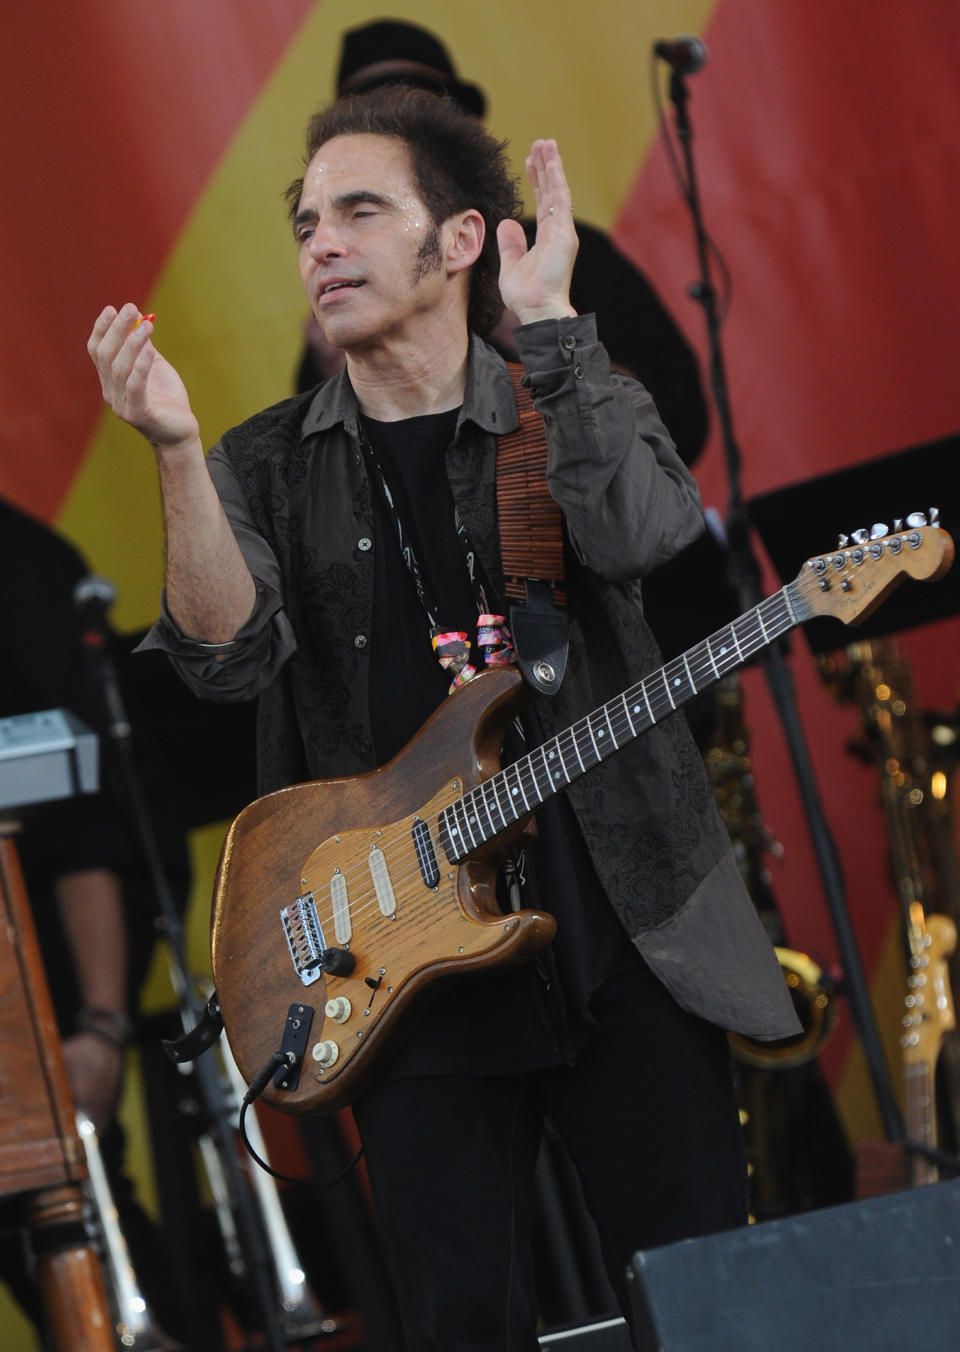 NEW ORLEANS, LA - APRIL 29: Nils Lofgren of Bruce Springsteen and the E Street Band performs during the 2012 New Orleans Jazz & Heritage Festival Day 3 at the Fair Grounds Race Course on April 29, 2012 in New Orleans, Louisiana. (Photo by Rick Diamond/Getty Images)